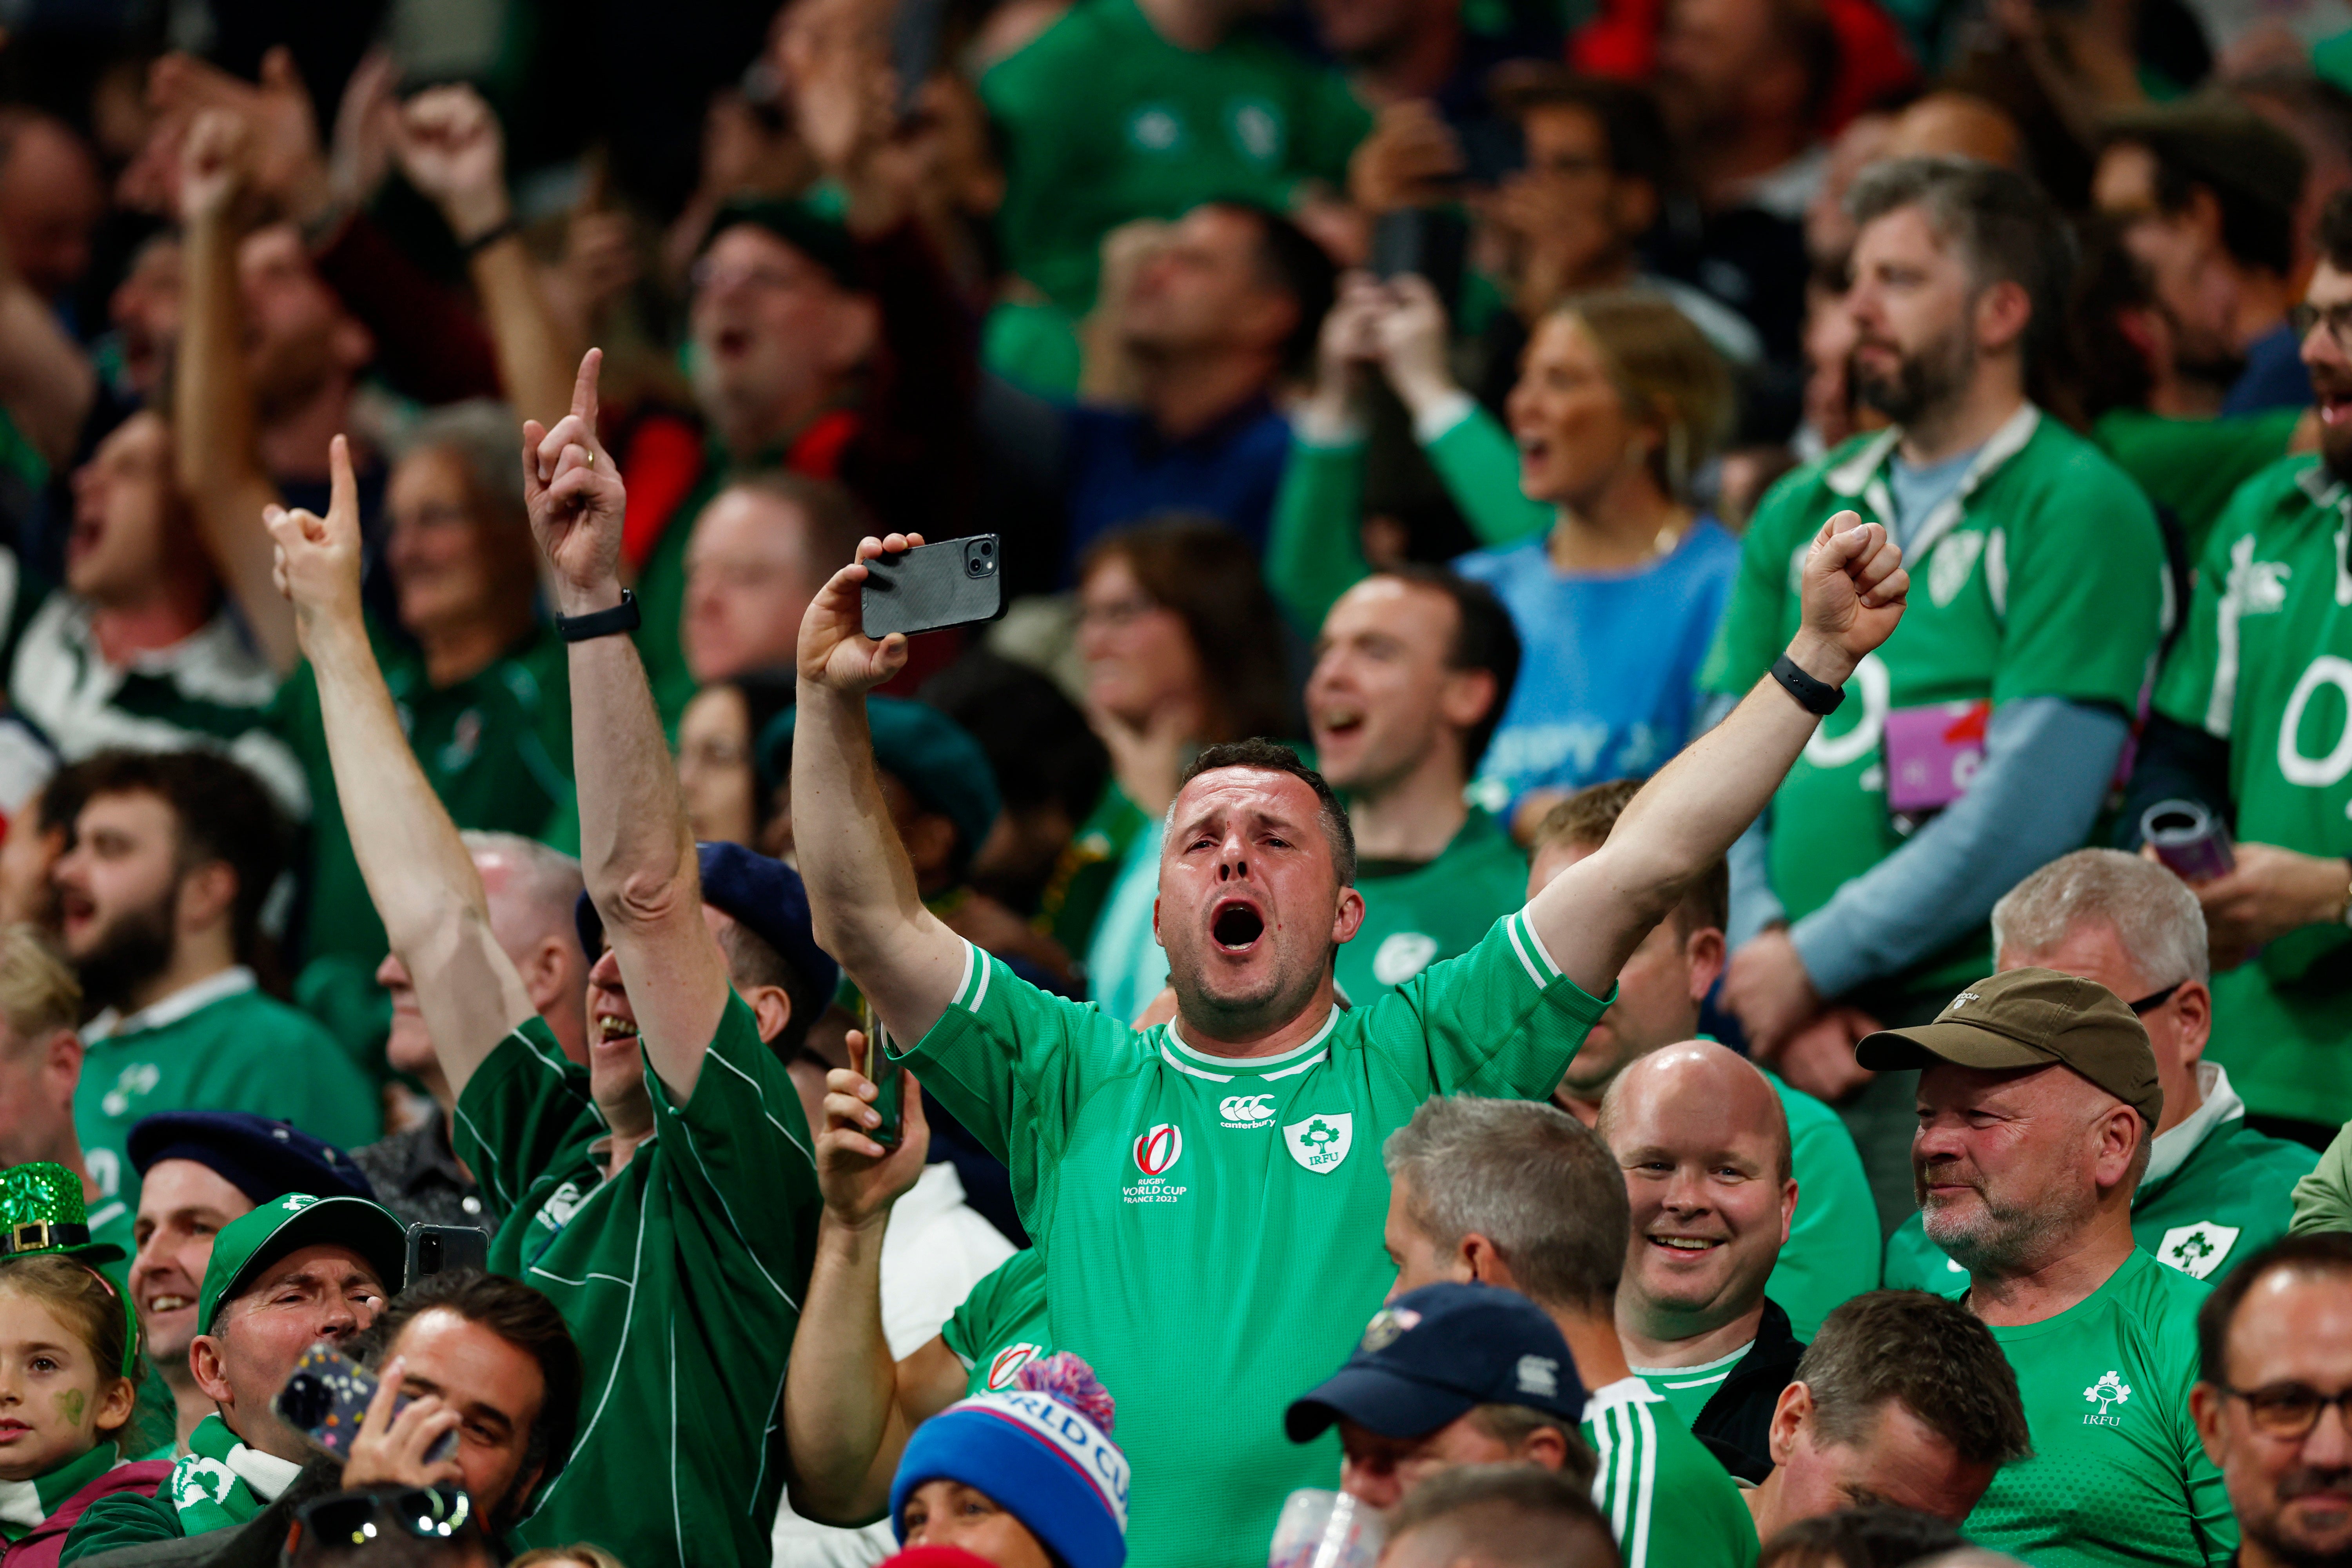 Ireland fans have adopted ‘Zombie’ as an anthem